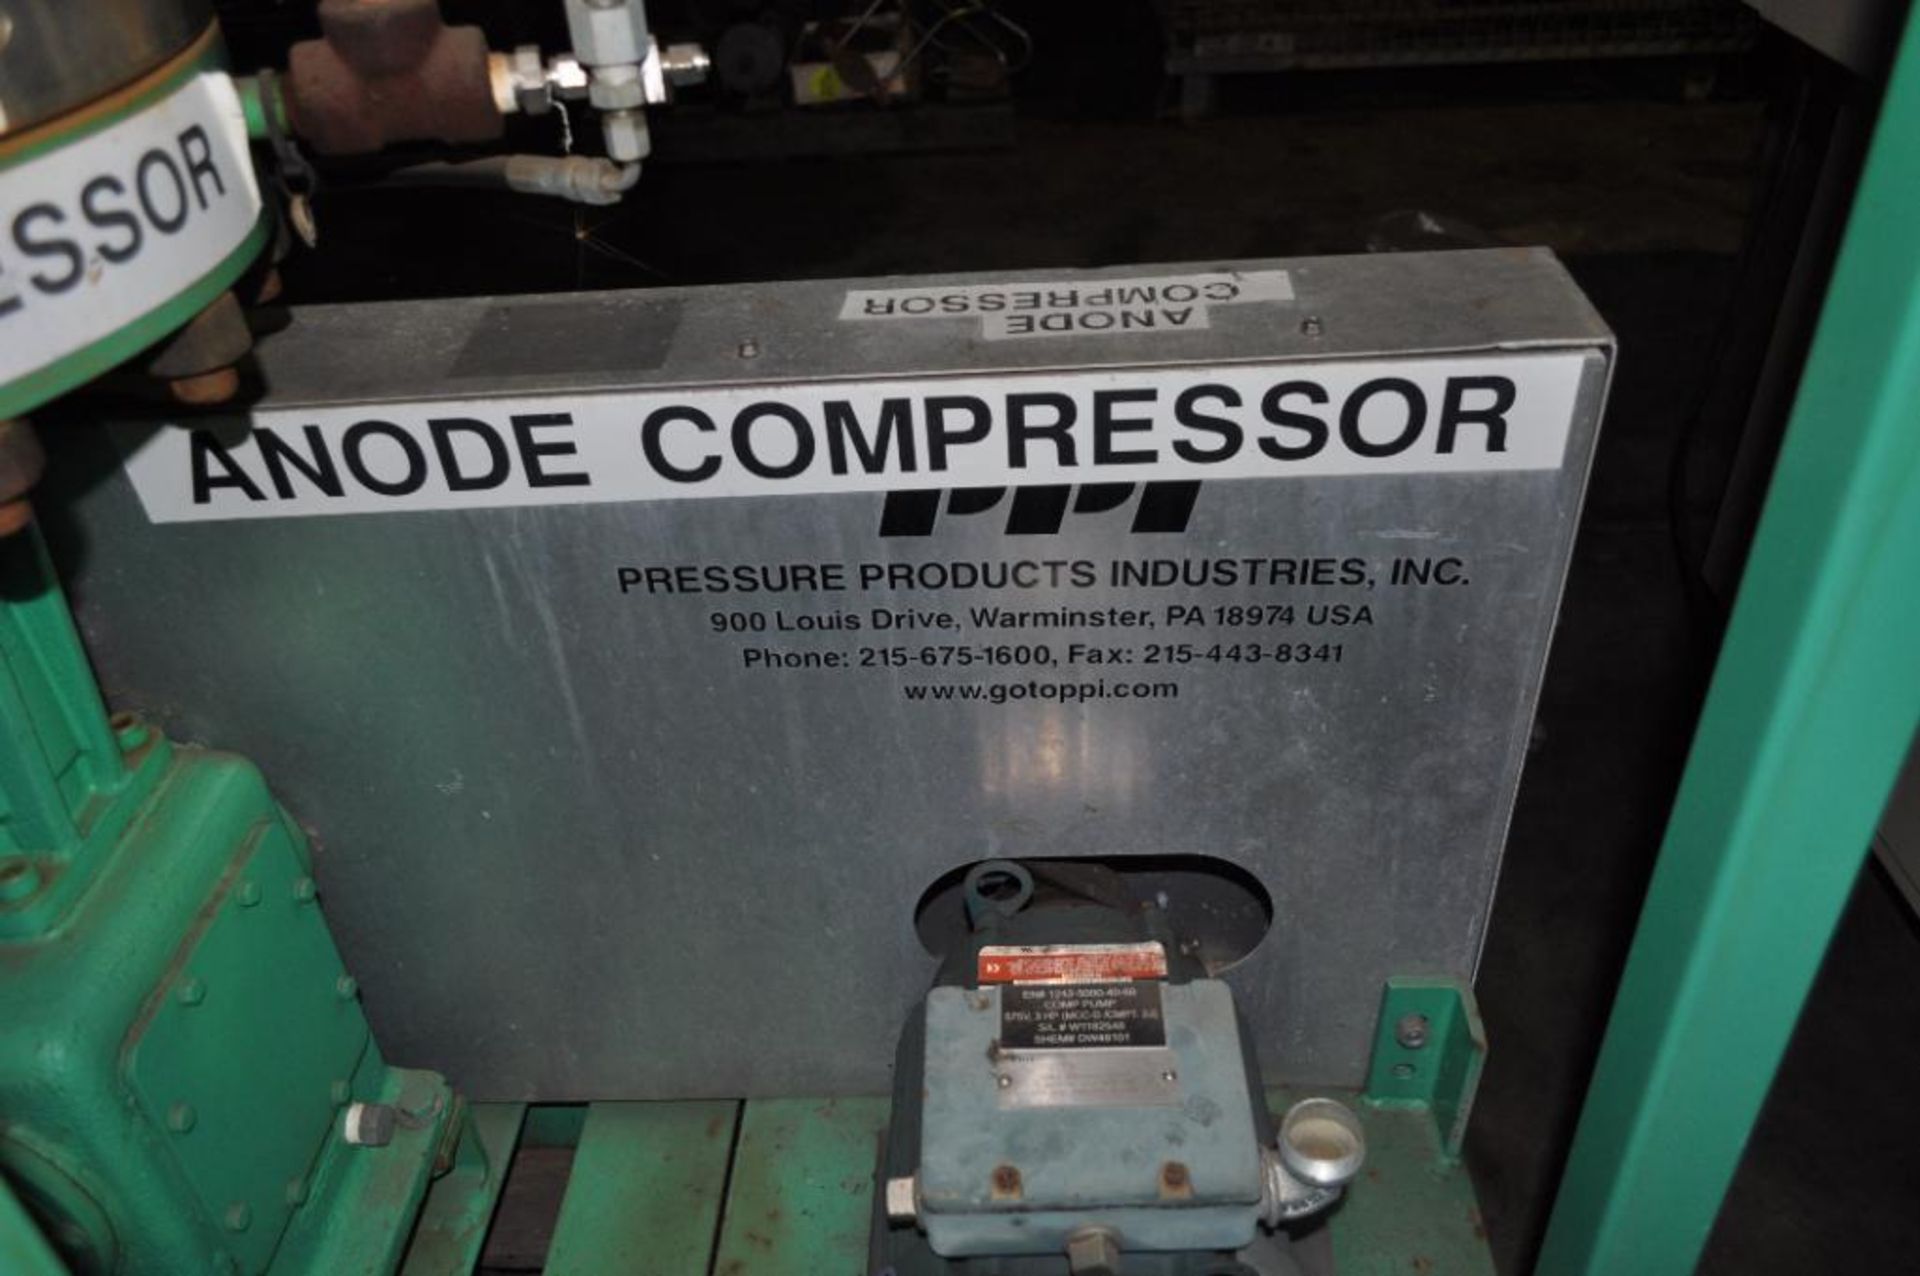 PRESSURE PRODUCTS INDUSTRIES INC. ANODE COMPRESSOR, U-439 - Image 3 of 6